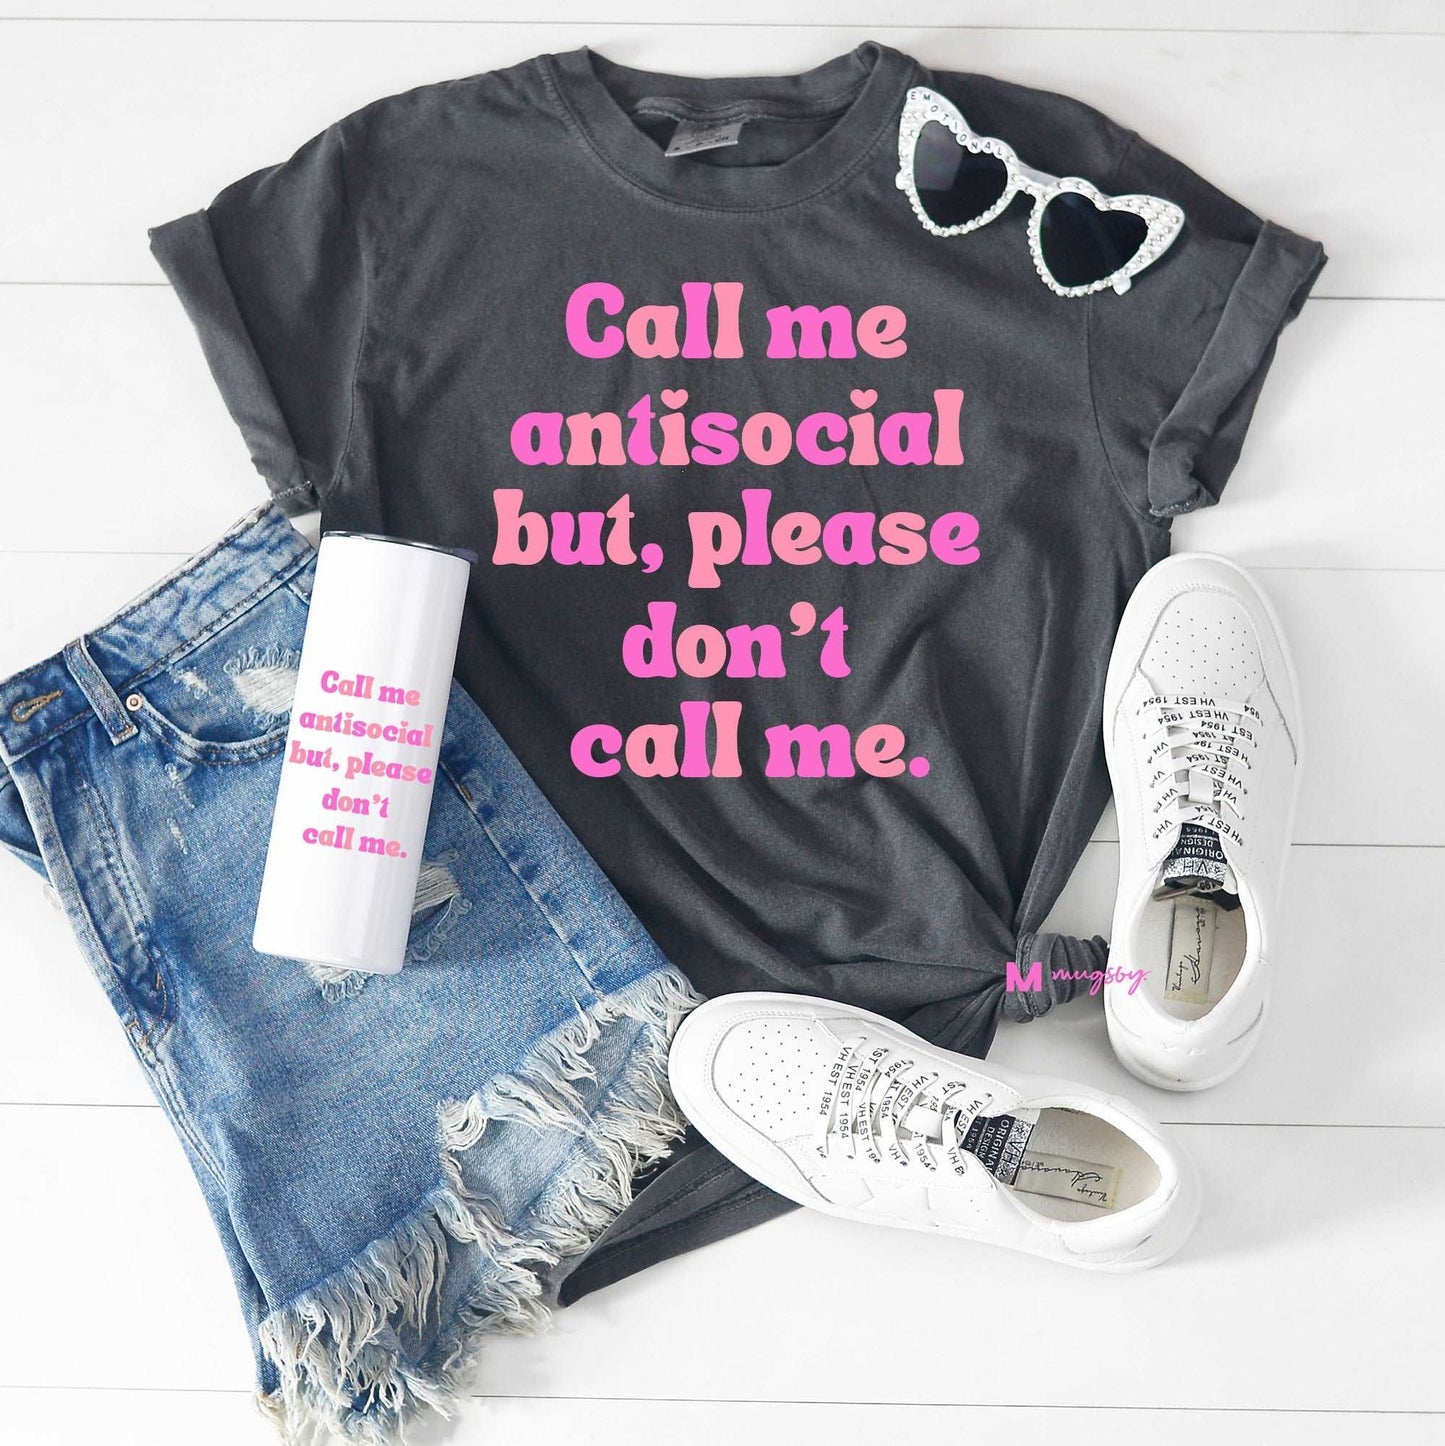 Gray tee with the words call me antisocial but please don't call me in pink letters.